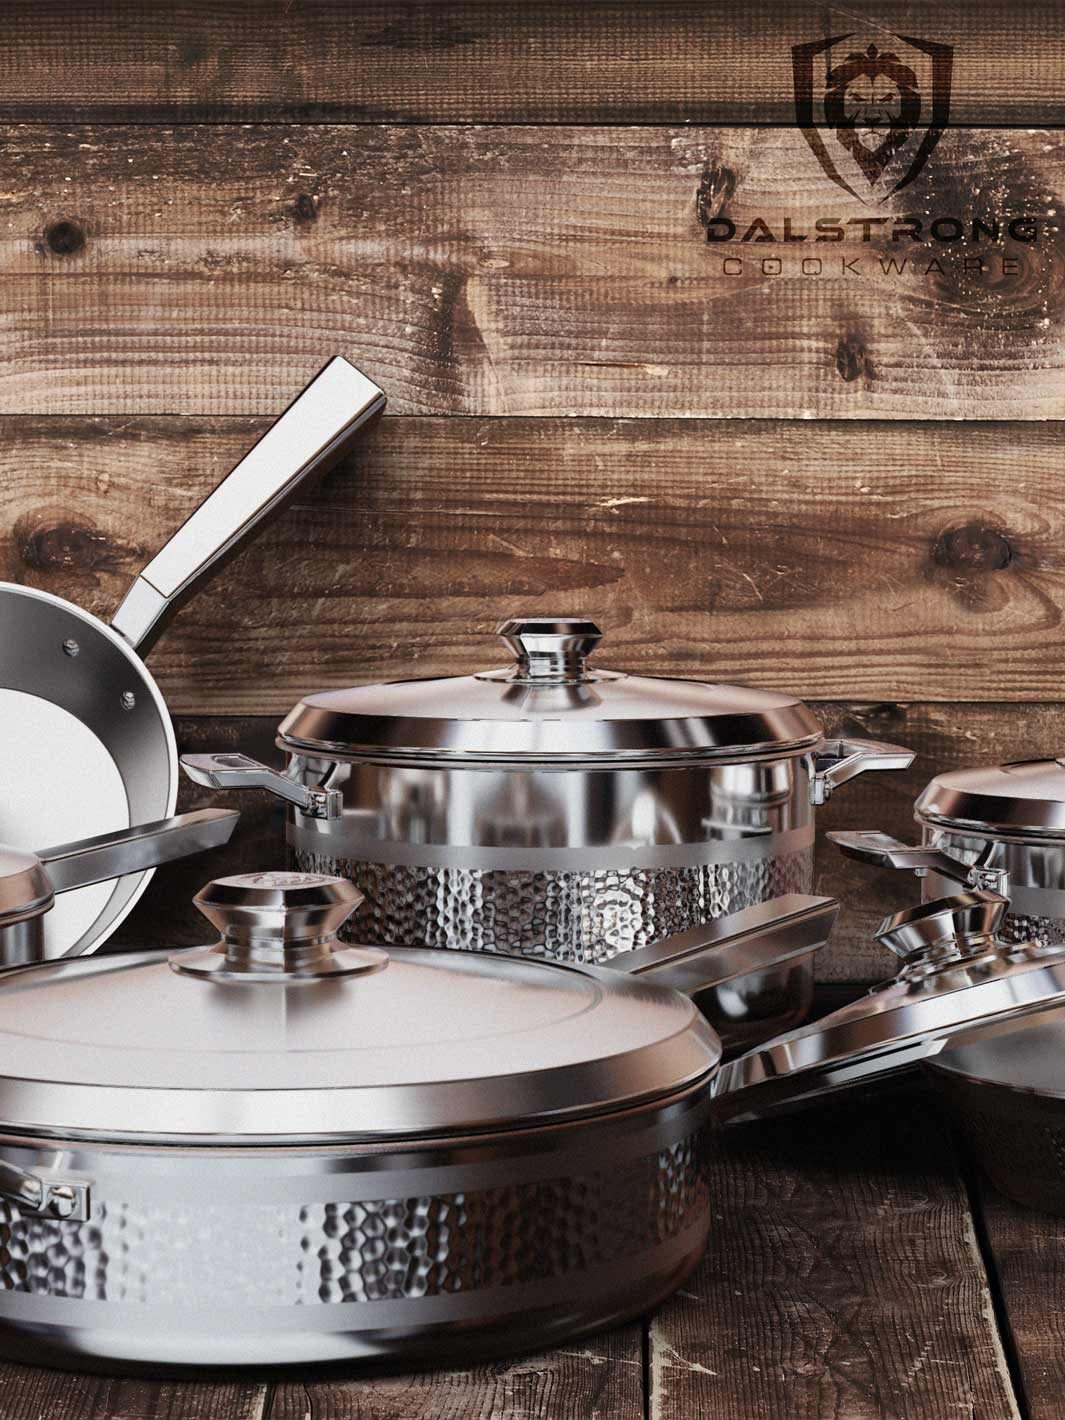 Dalstrong avalon series 12 piece cookware set silver on a wooden table.